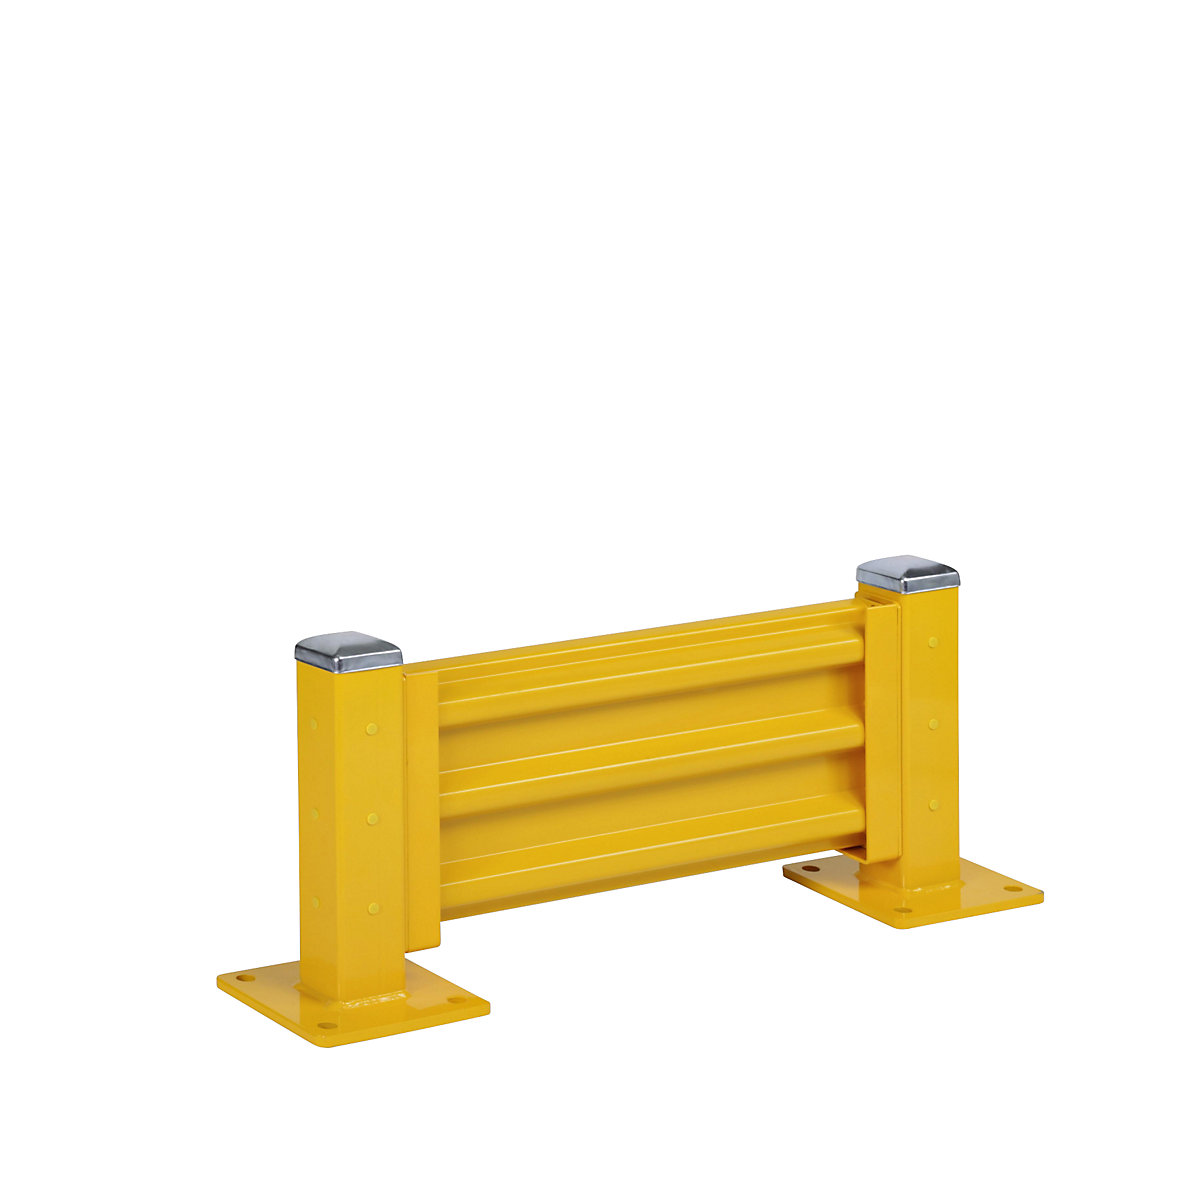 Crash protection wall, height 480 mm, 1 wall section, length 762 mm, standard section incl. 2 posts